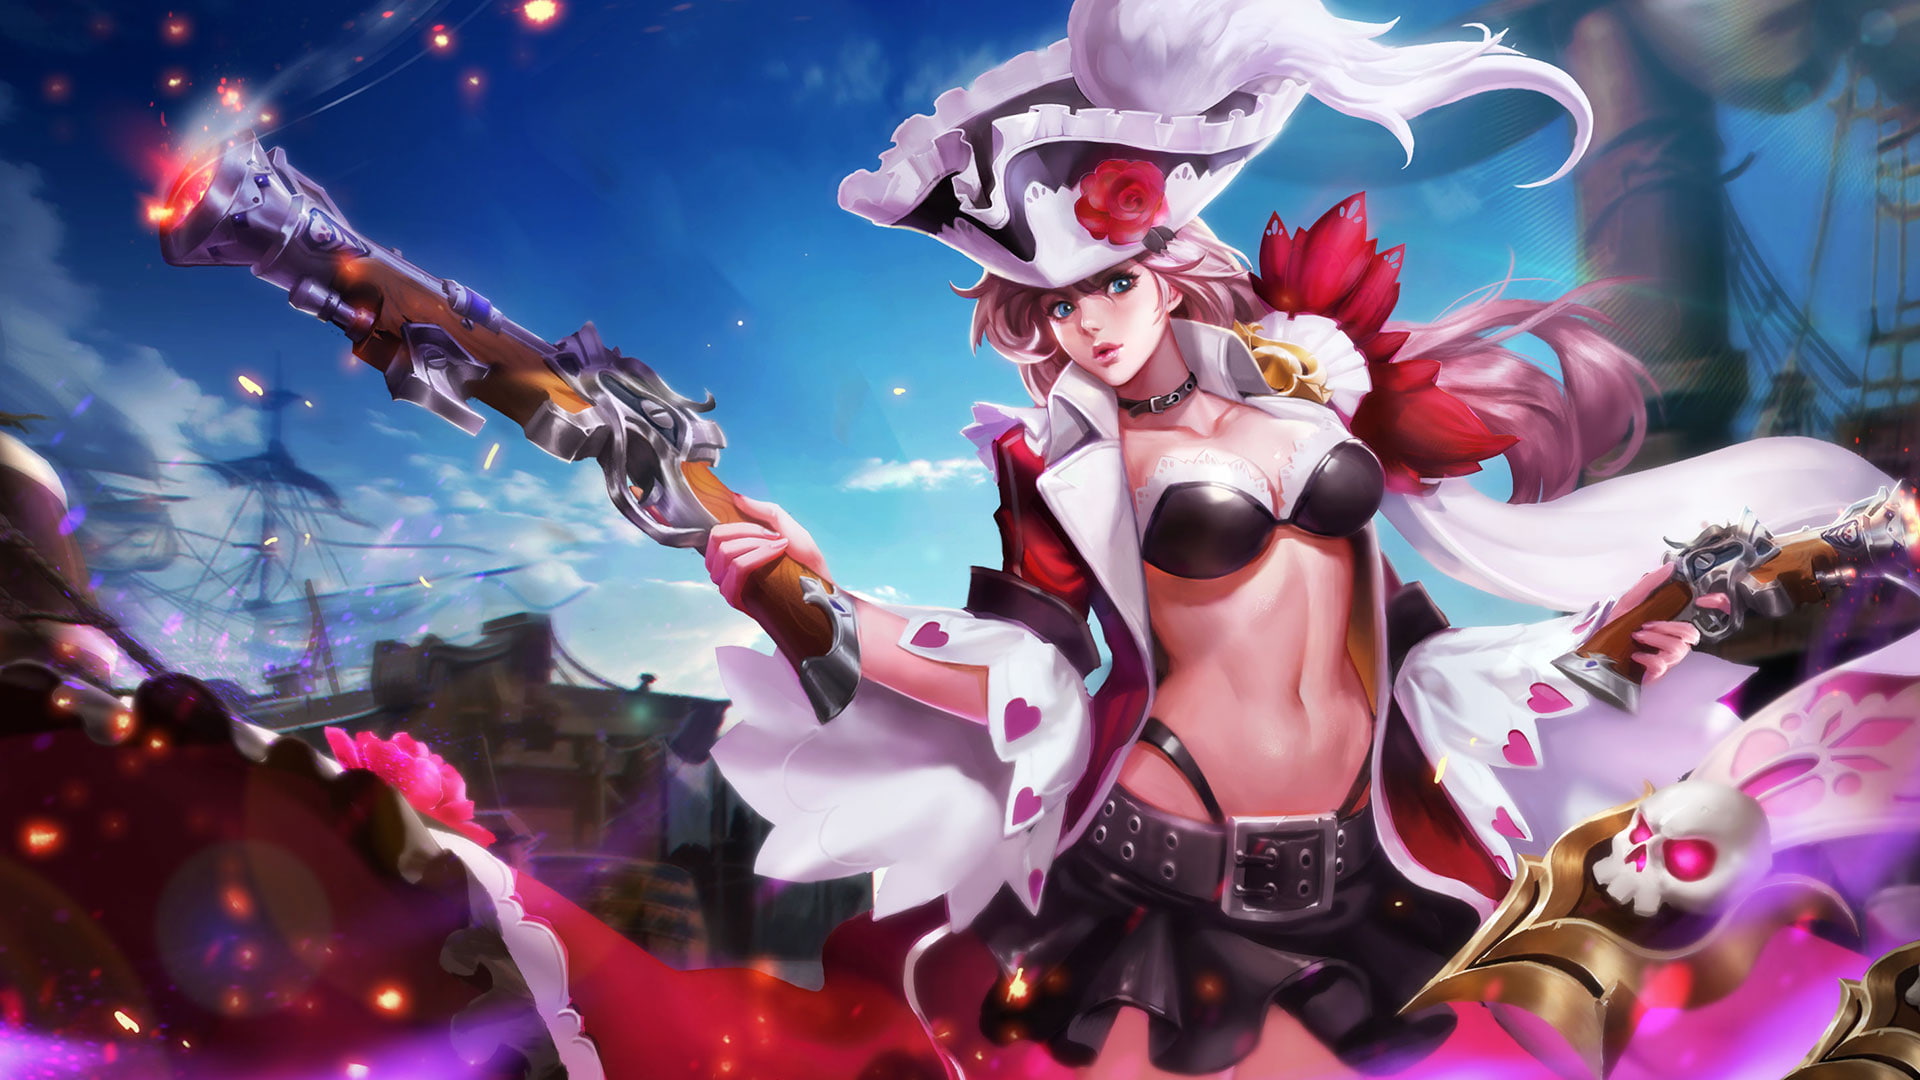 Glory Of King Hero Yuji Shooter Pirate Queen Hd Wallpaper For Laptop And Tablet 1920×1080